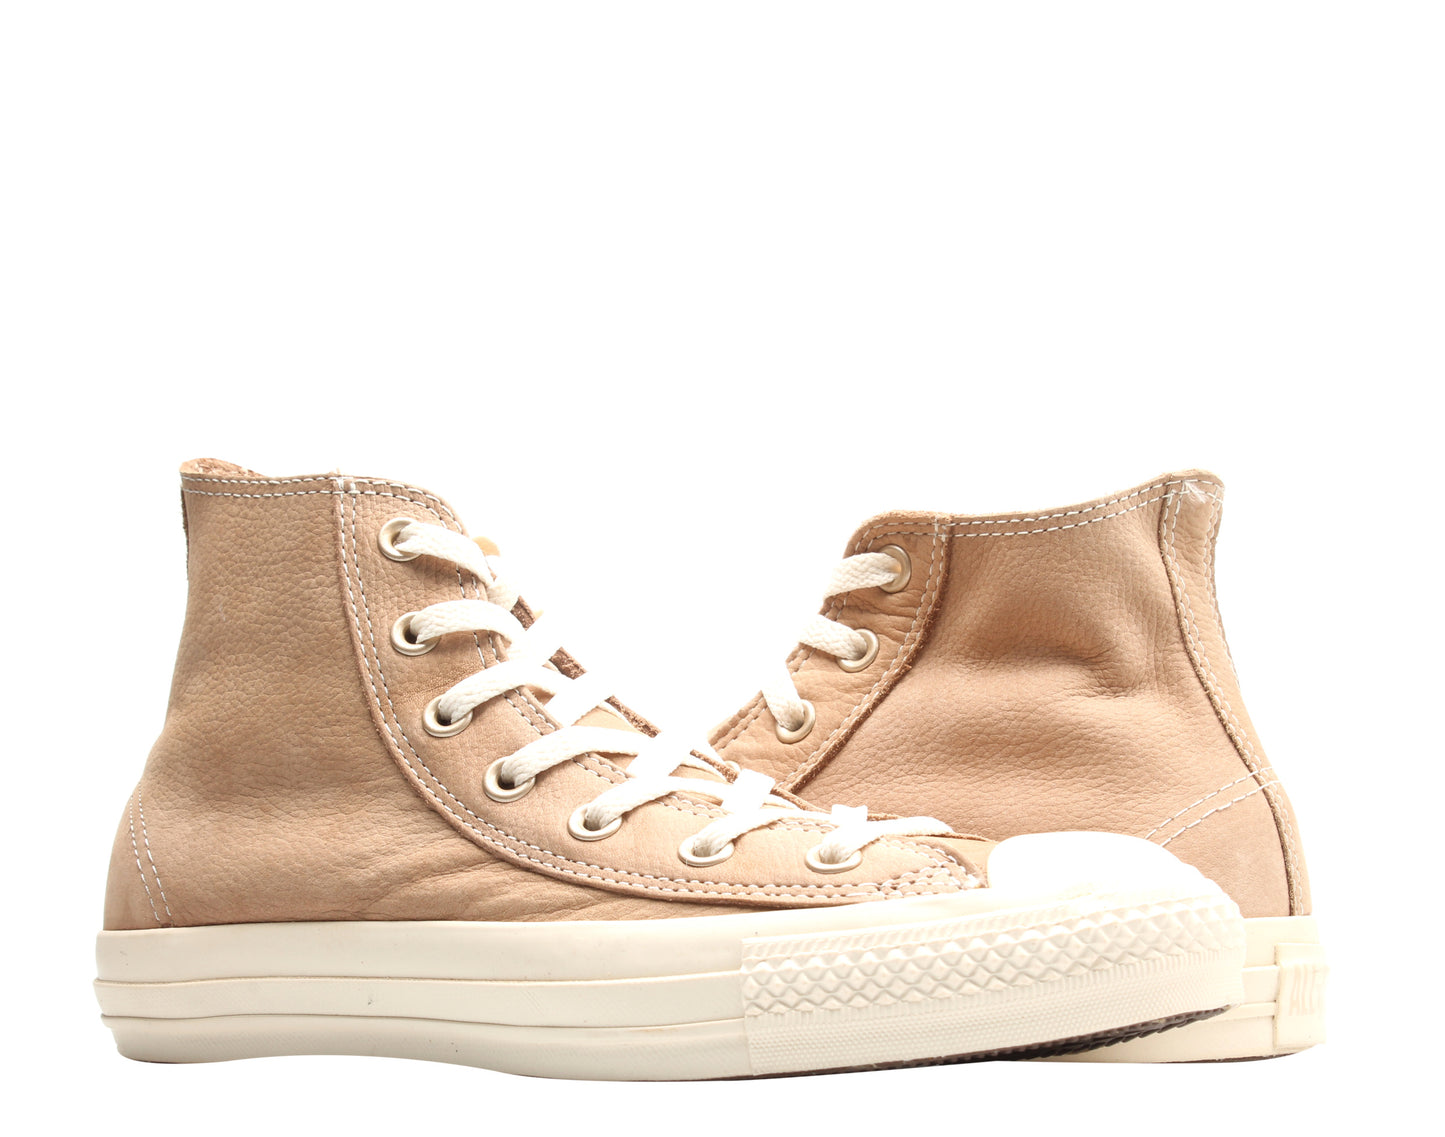 Converse Chuck Taylor All Star Special Leather Hi Sneakers